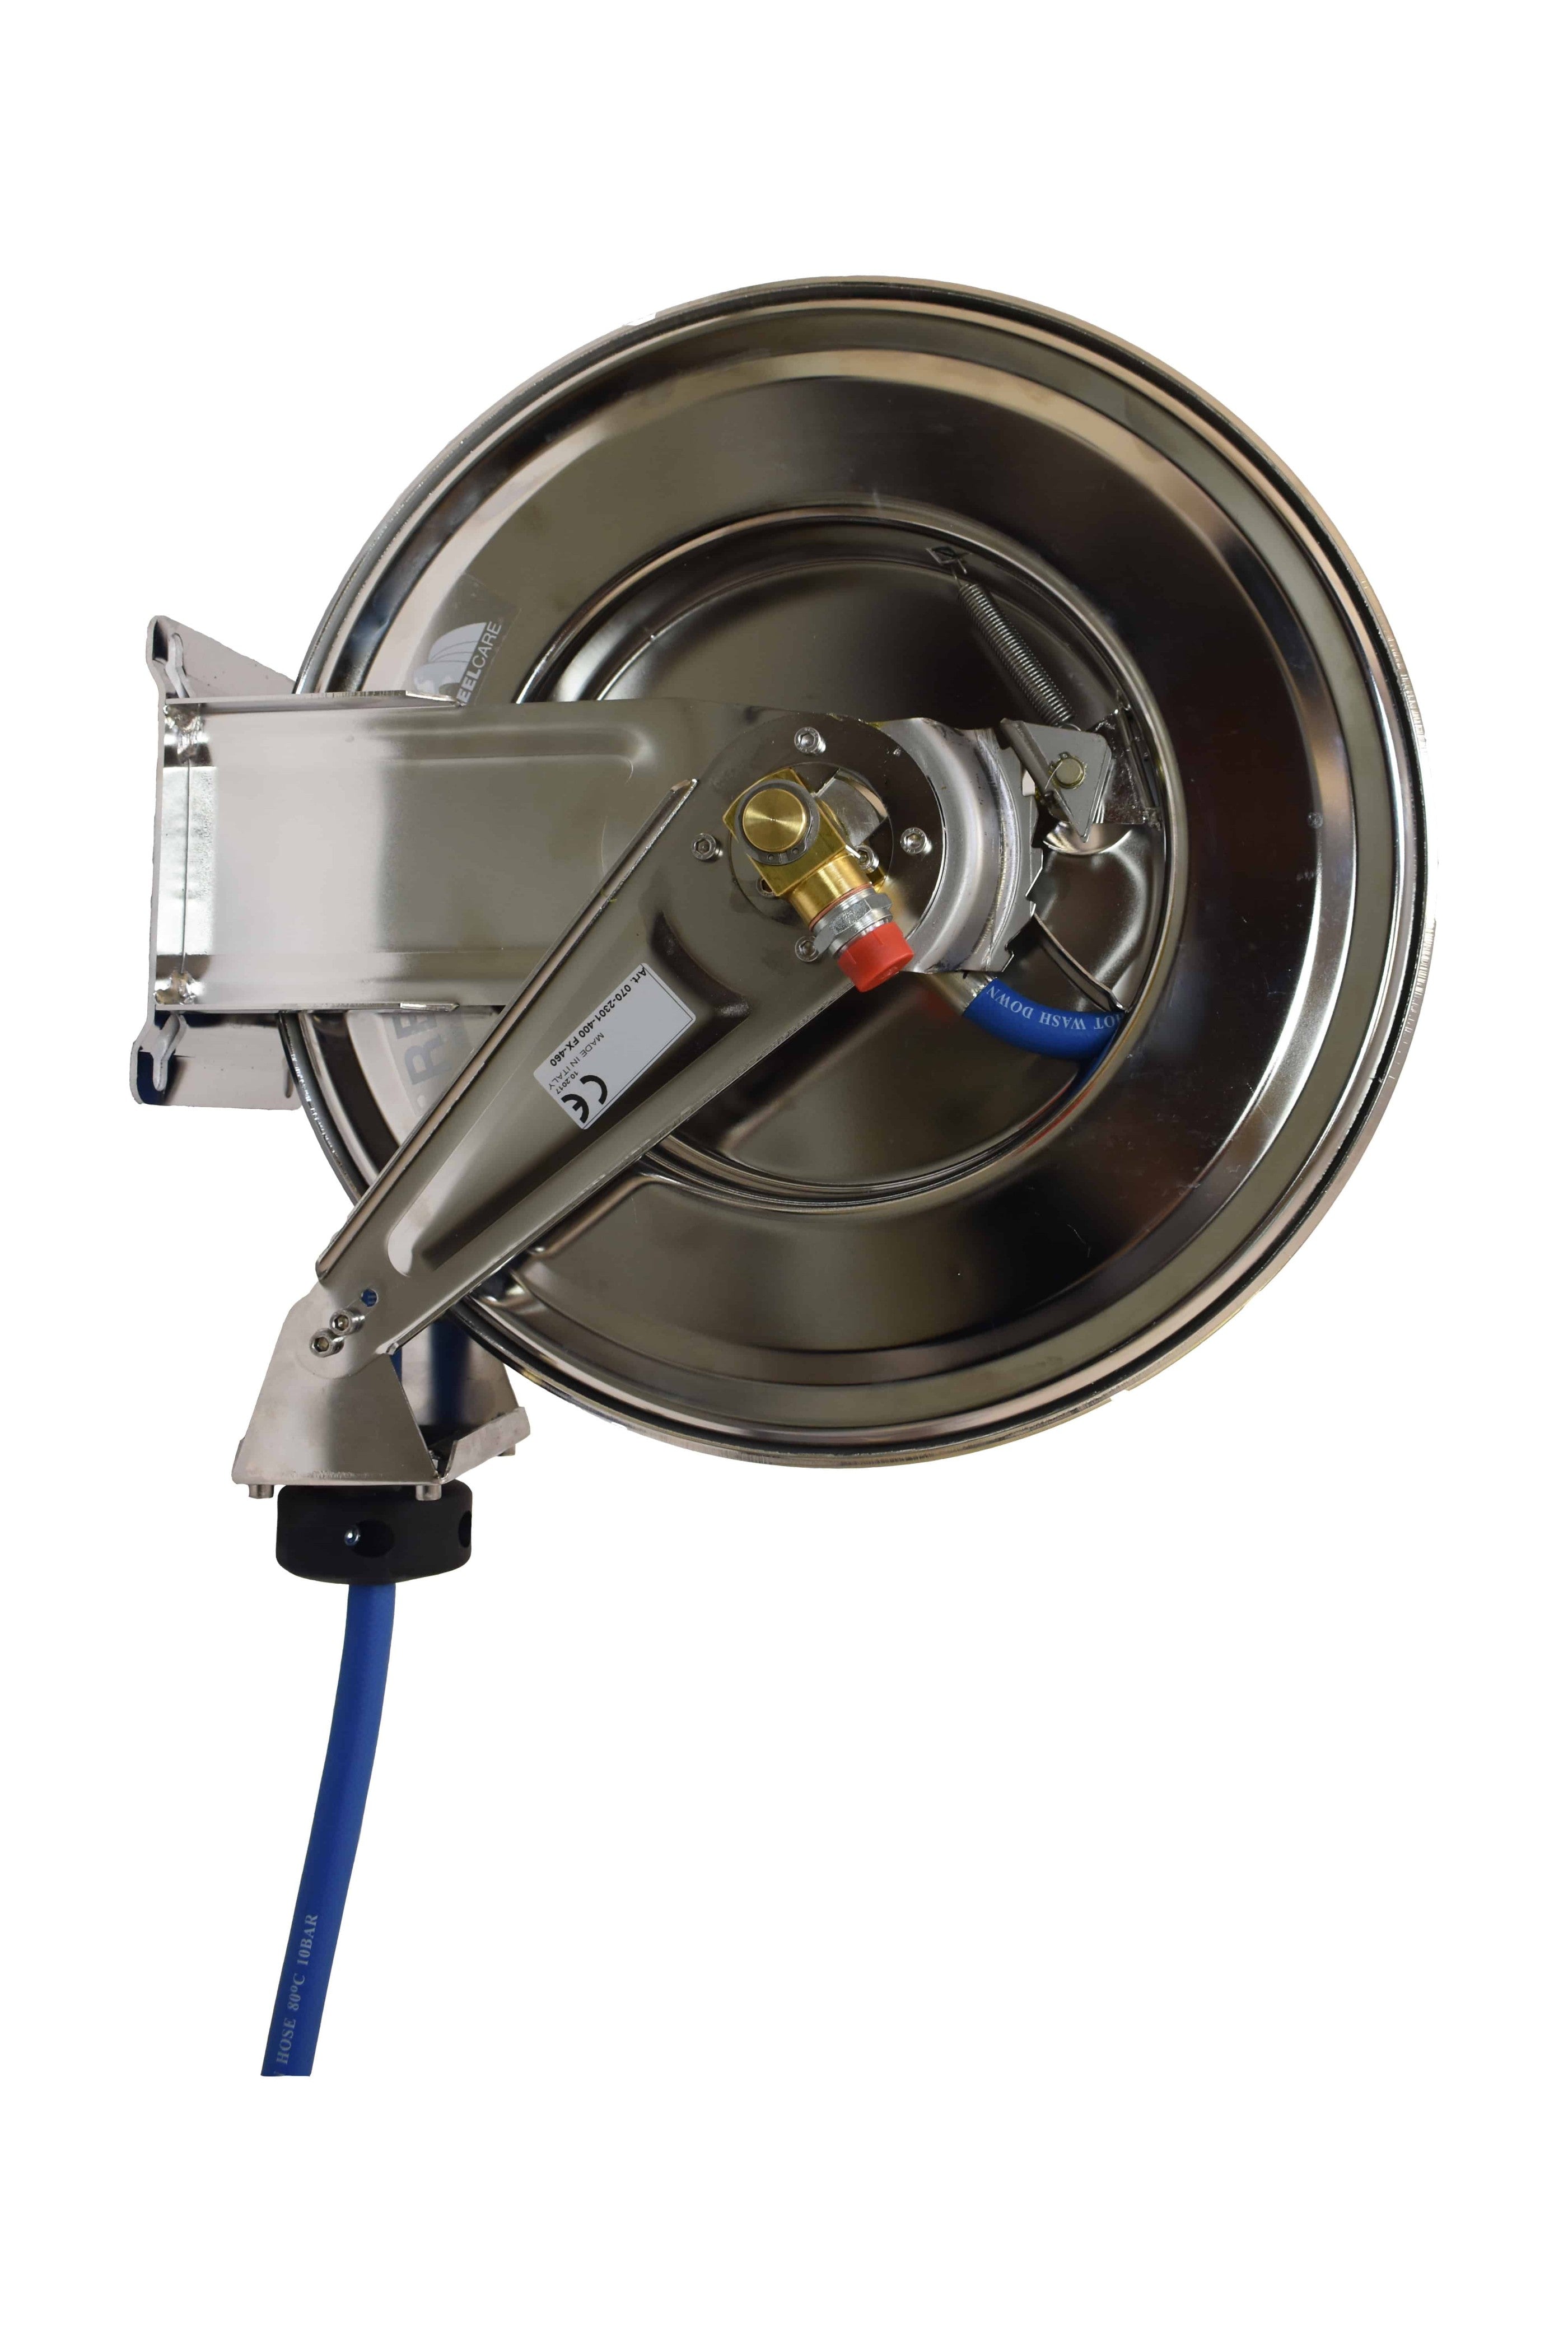 Stainless steel spring driven hose reel